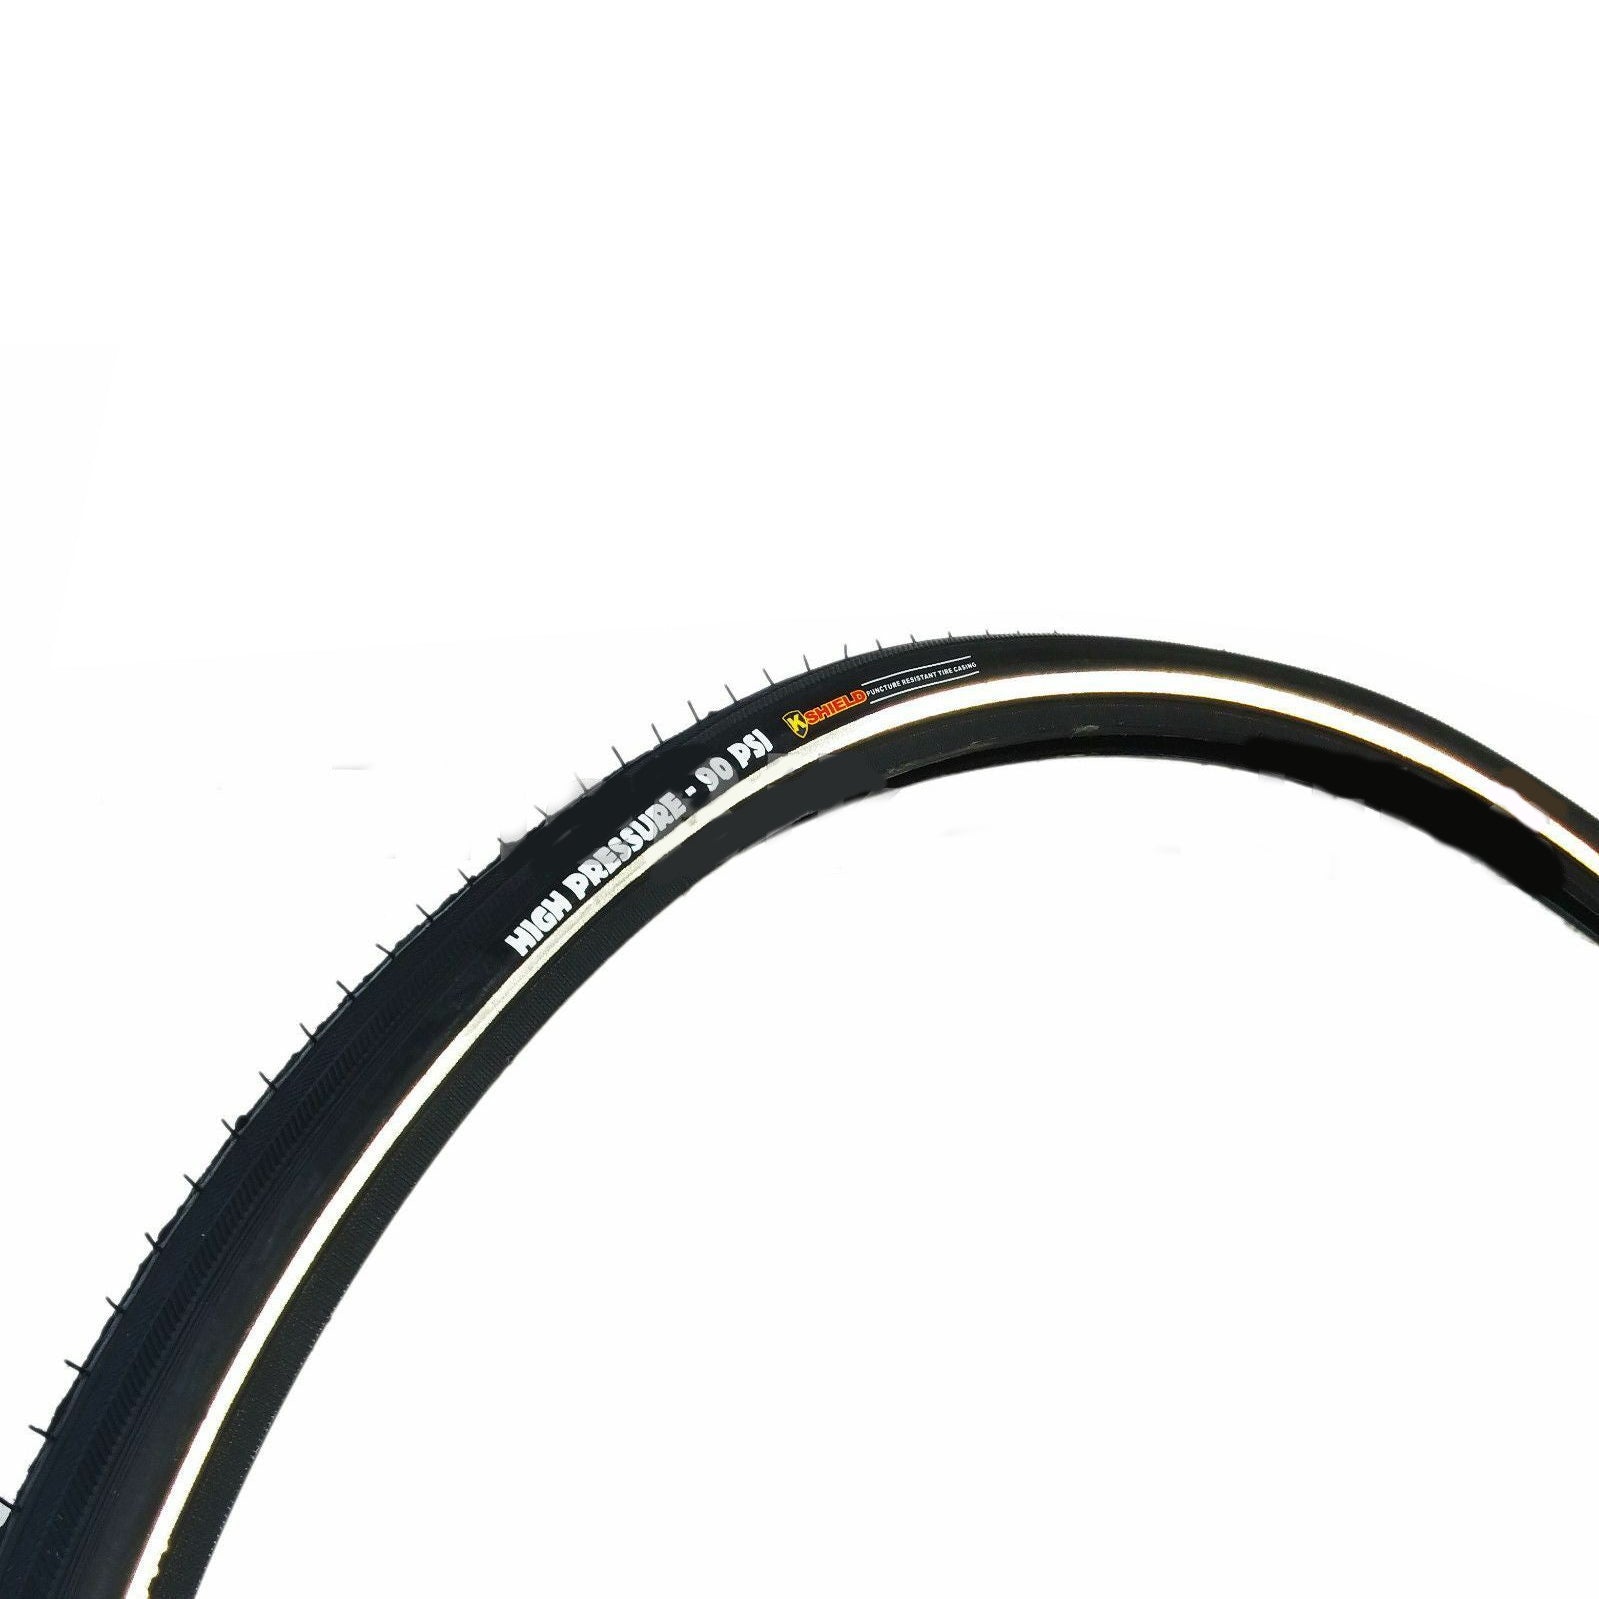 Kenda K35 27x1-1/4 Tire with K-Shield Puncture Protection and Reflective Sidewall - The Bikesmiths